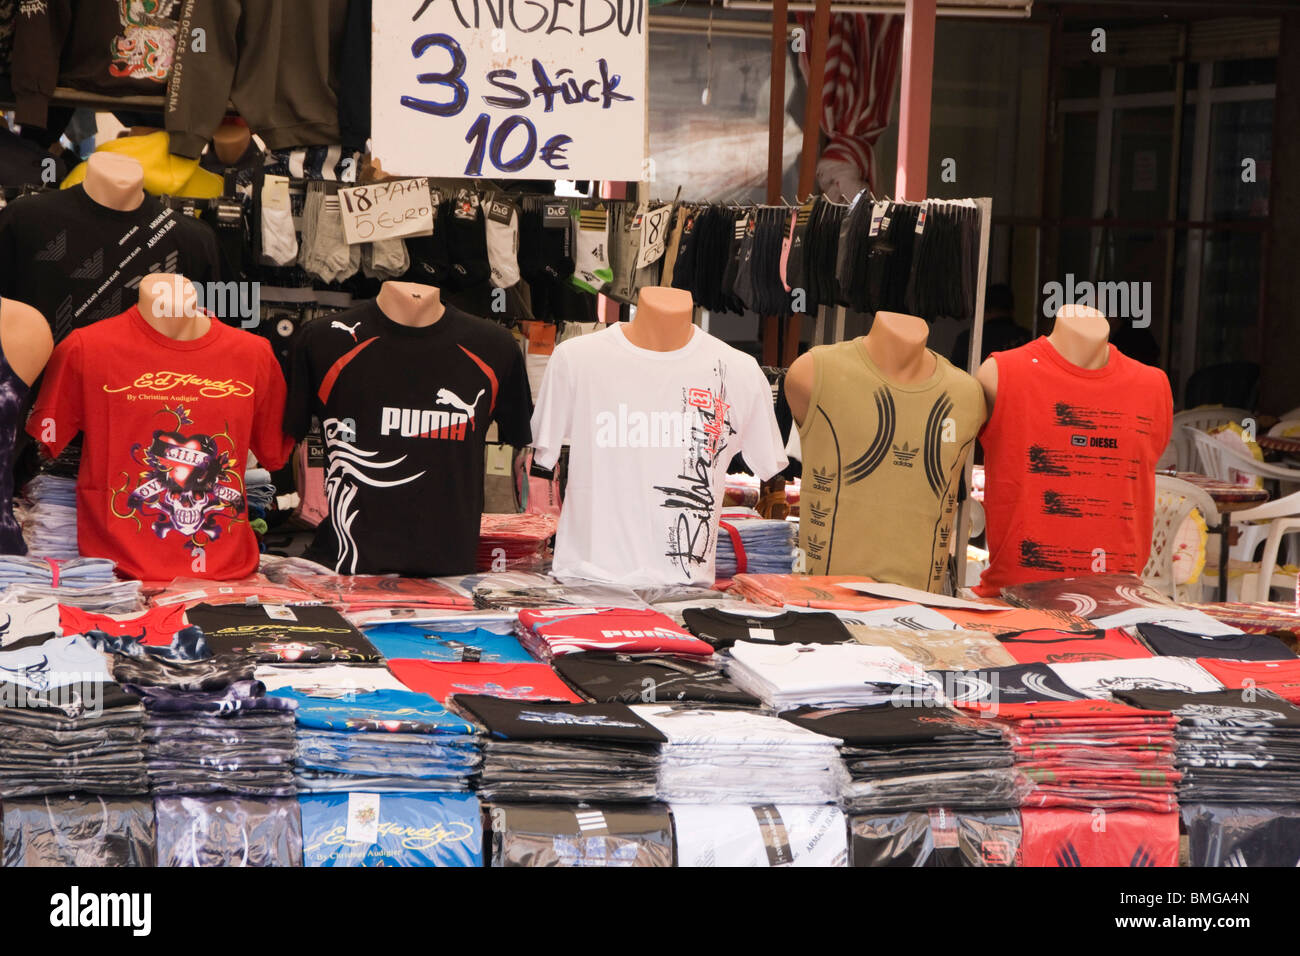 Zijn bekend Diplomaat D.w.z Turkey Antalya - Manavgat market - fake or copied branded clothing  including Adidas, Puma and Diesel - 3 items for 10 euros Stock Photo - Alamy